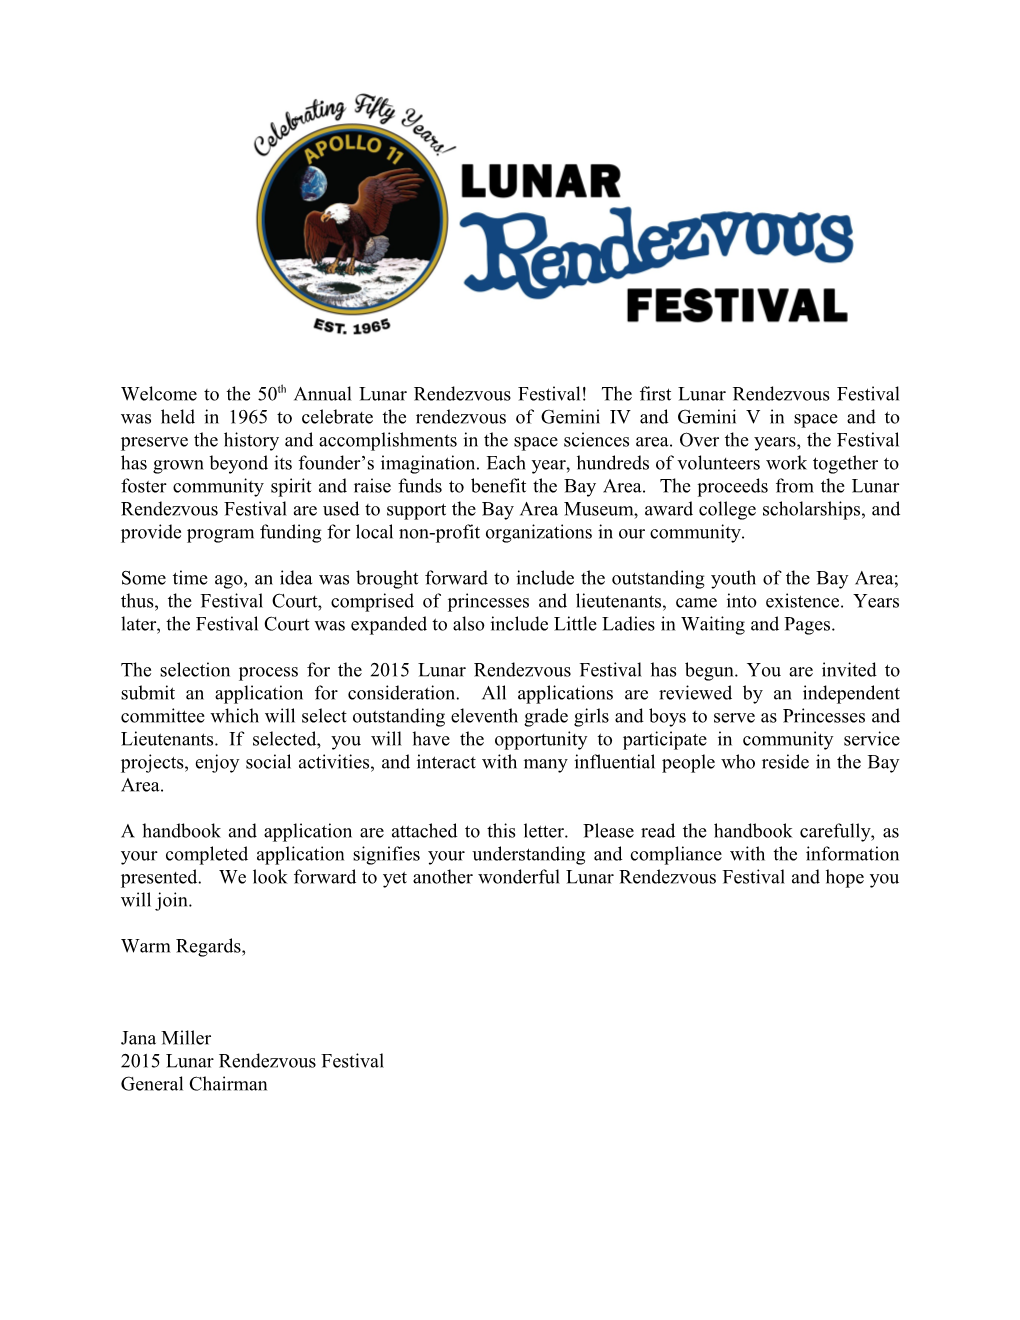 Welcome to the 50Th Annual Lunar Rendezvous Festival! the First Lunar Rendezvous Festival